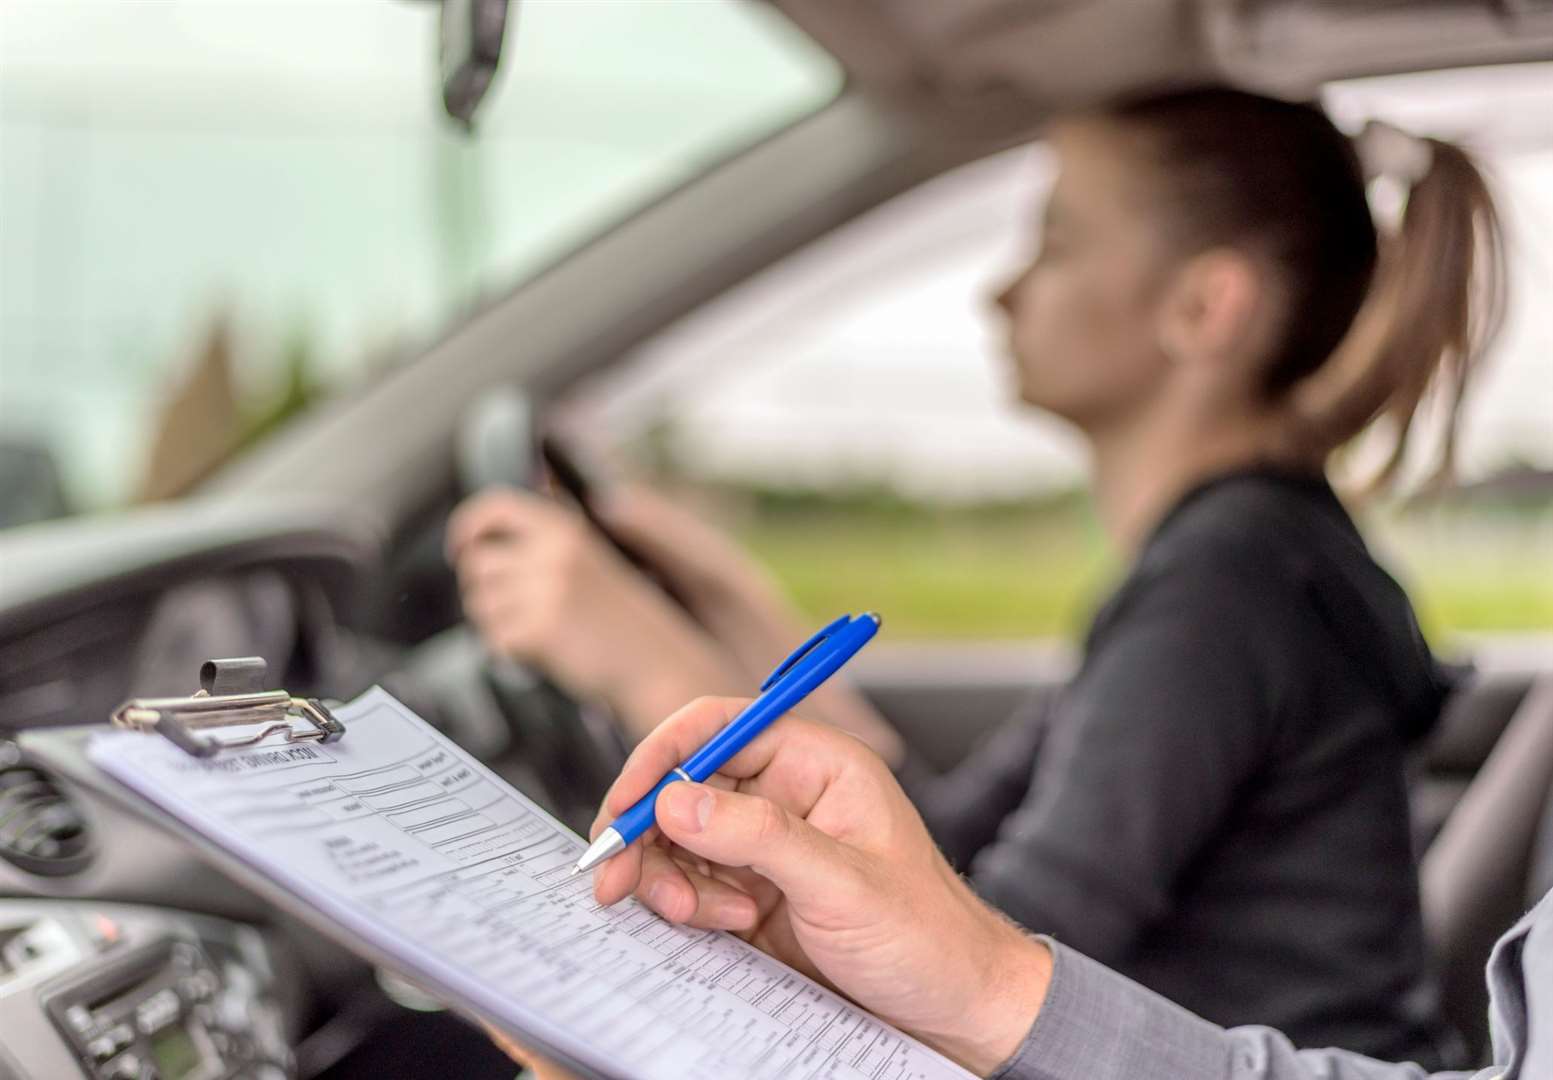 Driving exams are marked strictly now says Jeremy. Picture: Getty Images/iStock